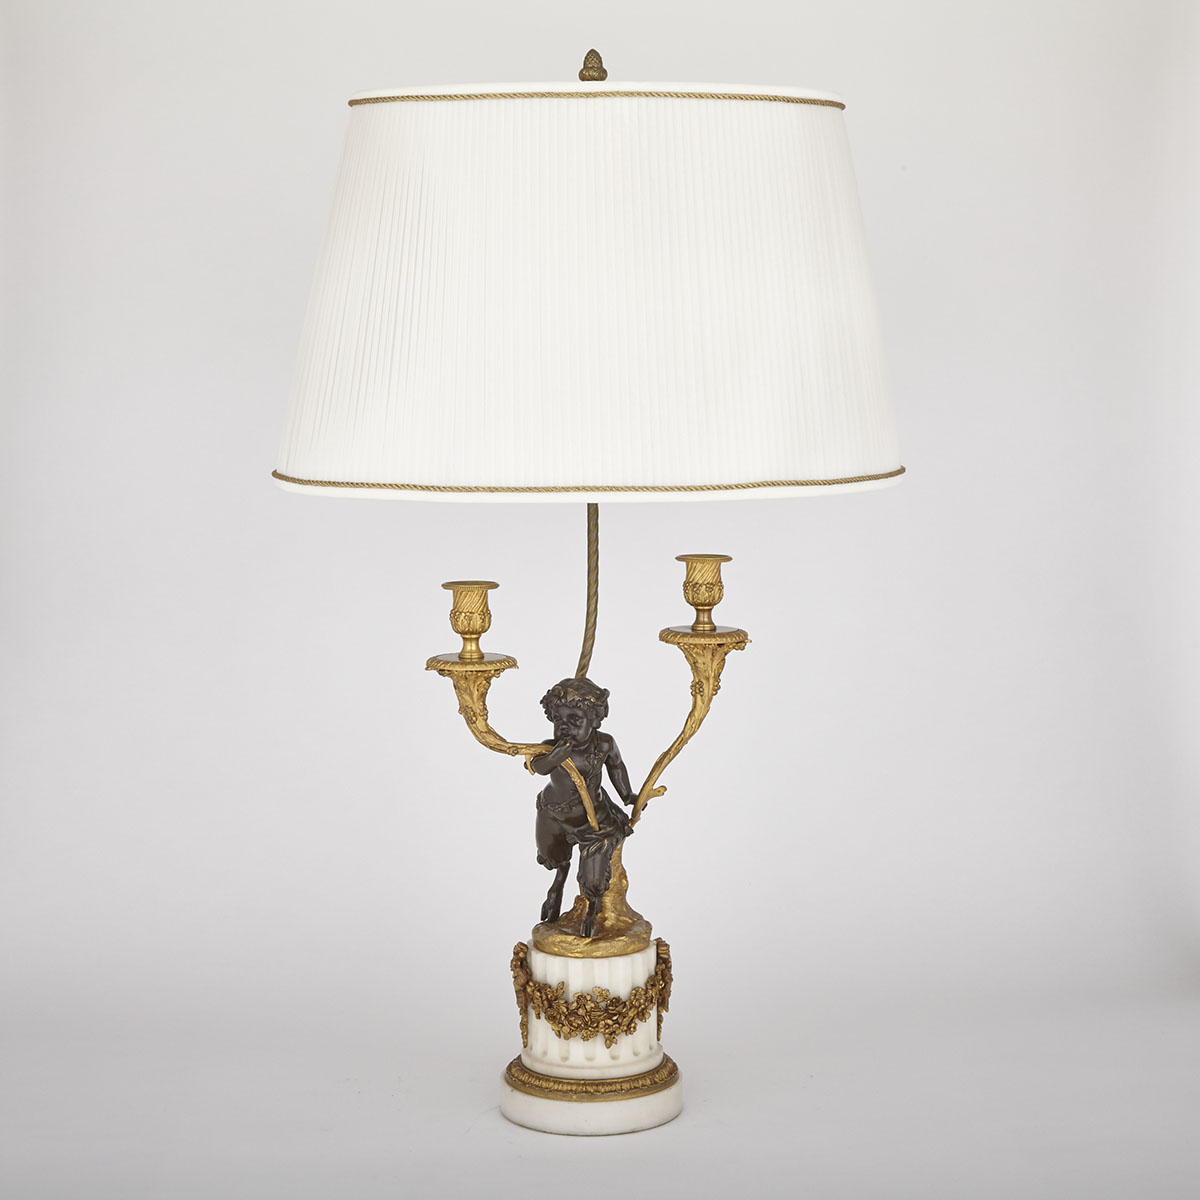 French Gilt and Patinated Bronze Figural Candelabra Form Table Lamp, early 20th century